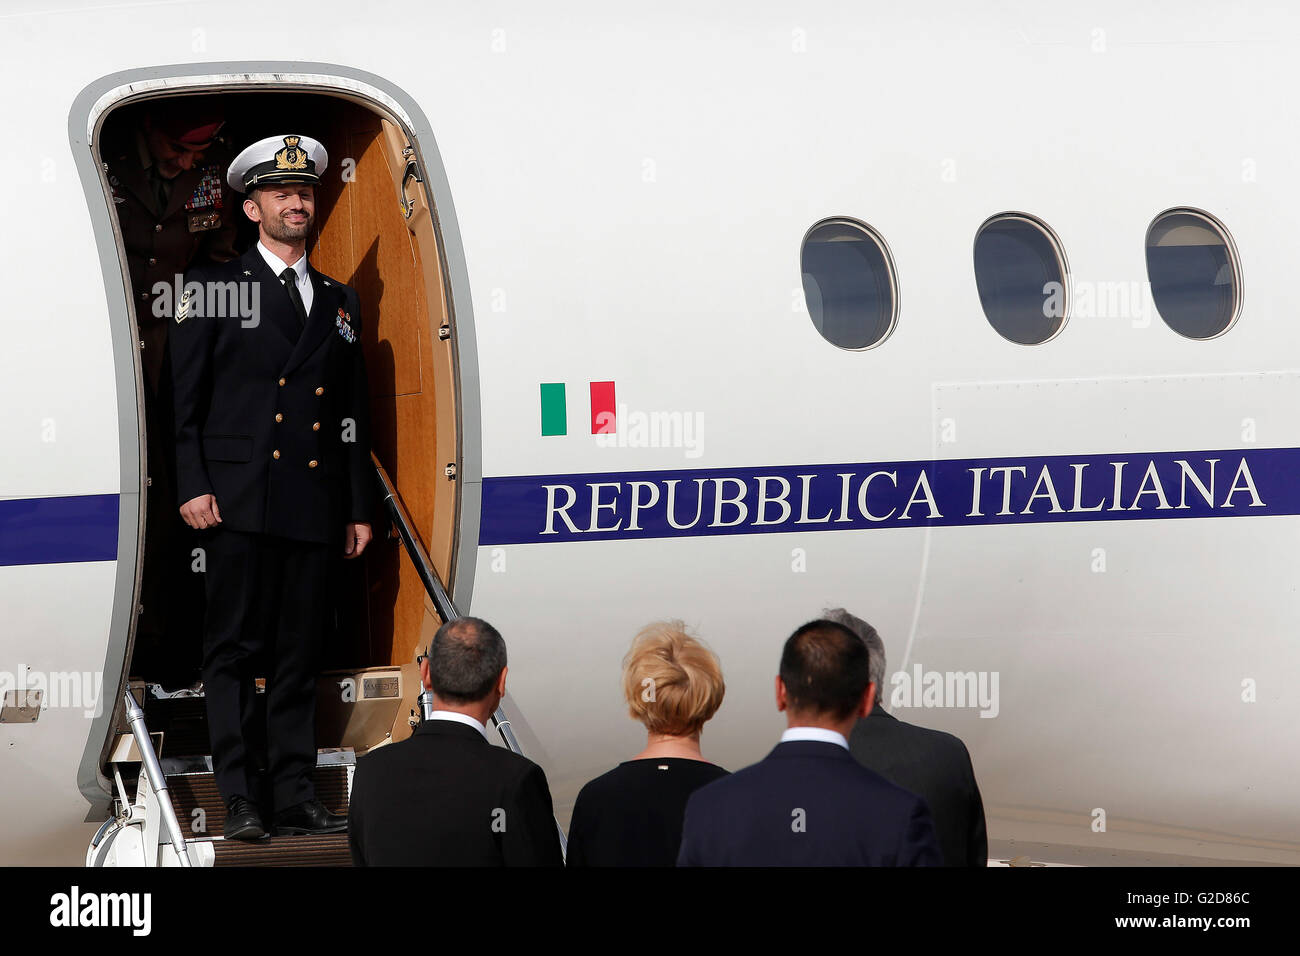 Salvatore Girone gets off the airplane Rome 28th May 2016. Return of Salvatore Girone, the non-comissioned officer of the Italian Navy, arrested in India under the accusation of murder. Photo Samantha Zucchi Insidefoto Stock Photo